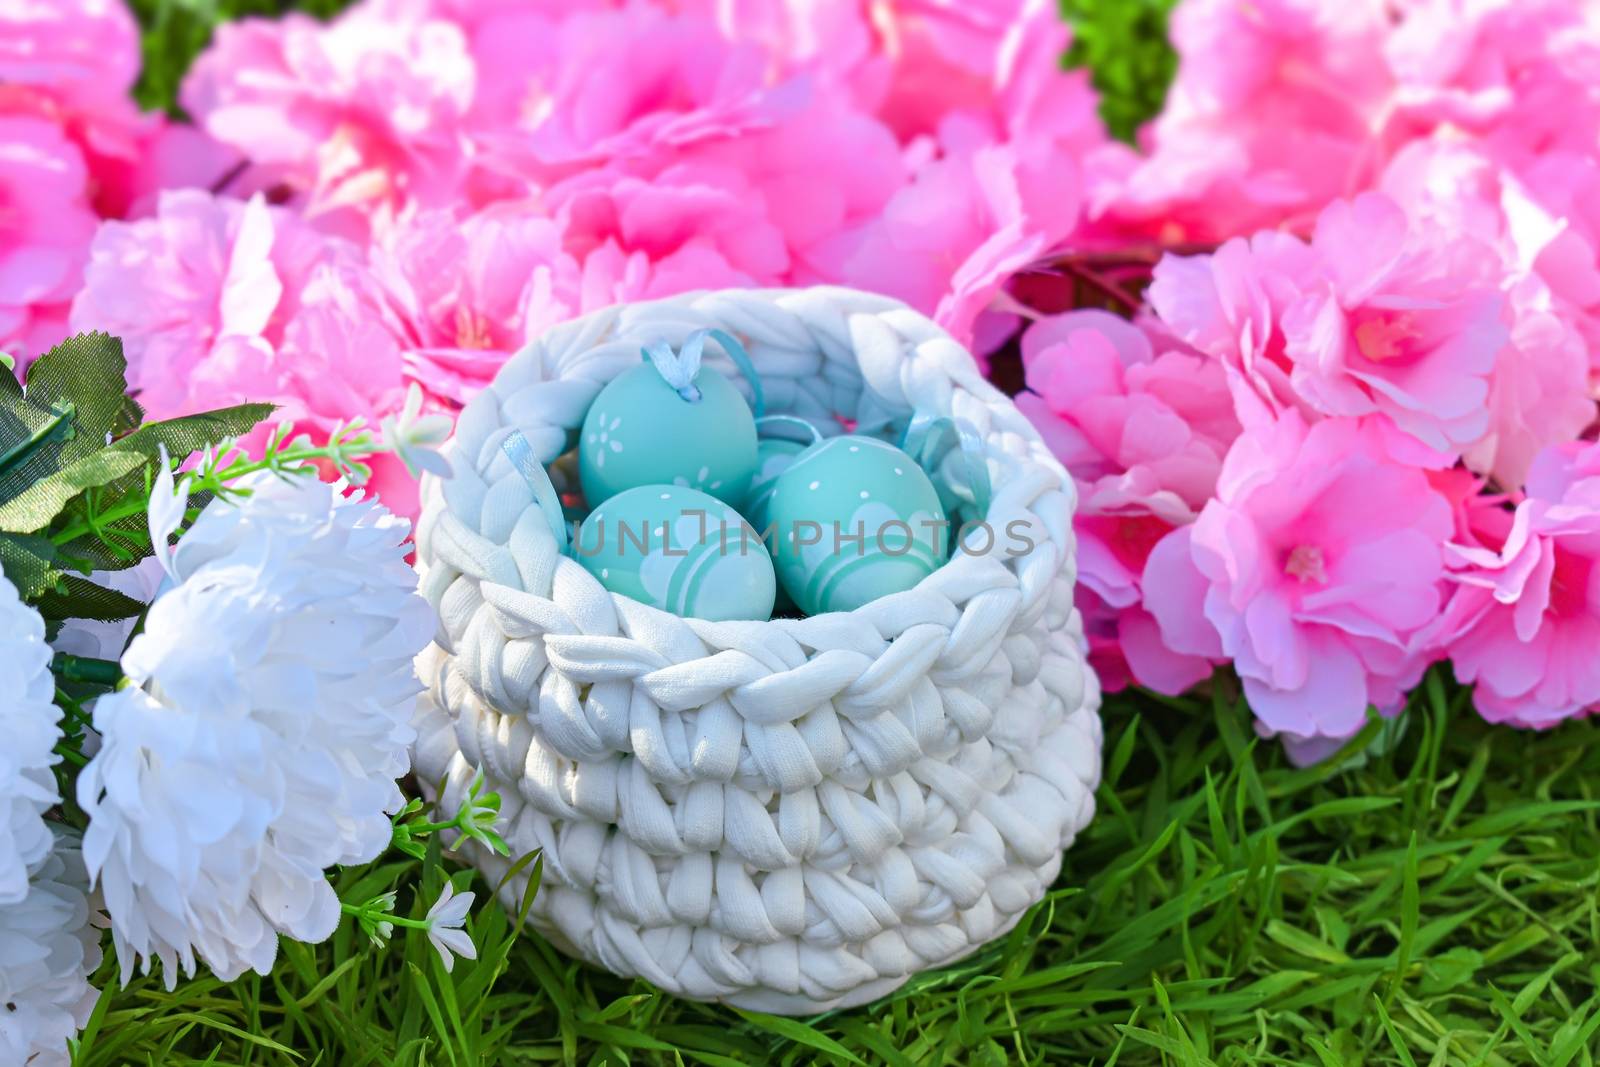 Floral easter background. Painted eggs in crochet basket on green grass. Next to it pink and white flowers decoration.